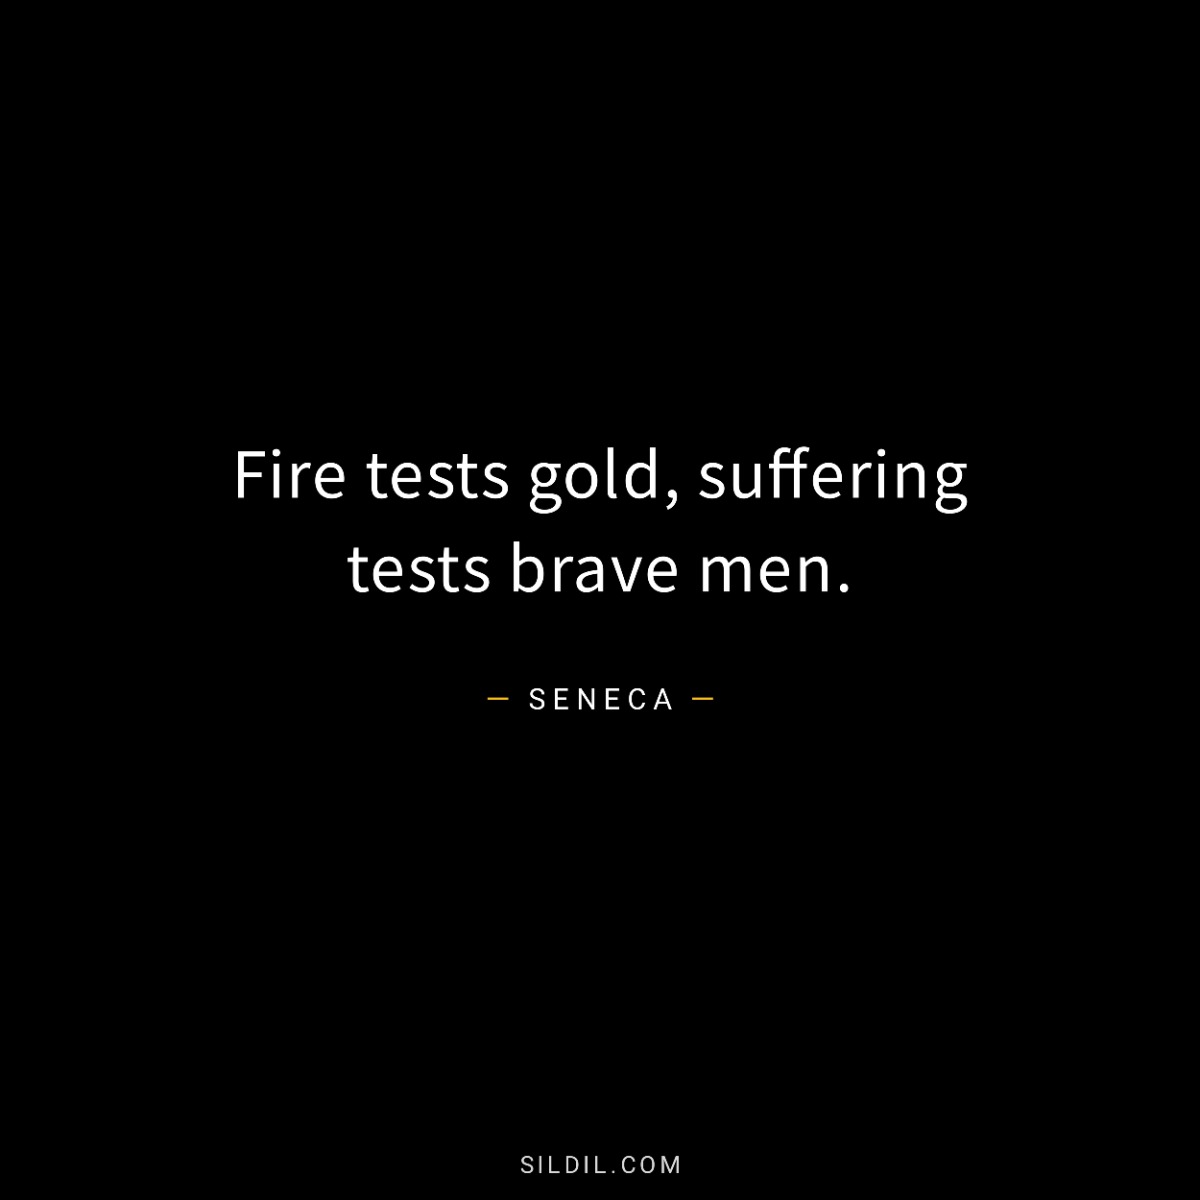 Fire tests gold, suffering tests brave men.